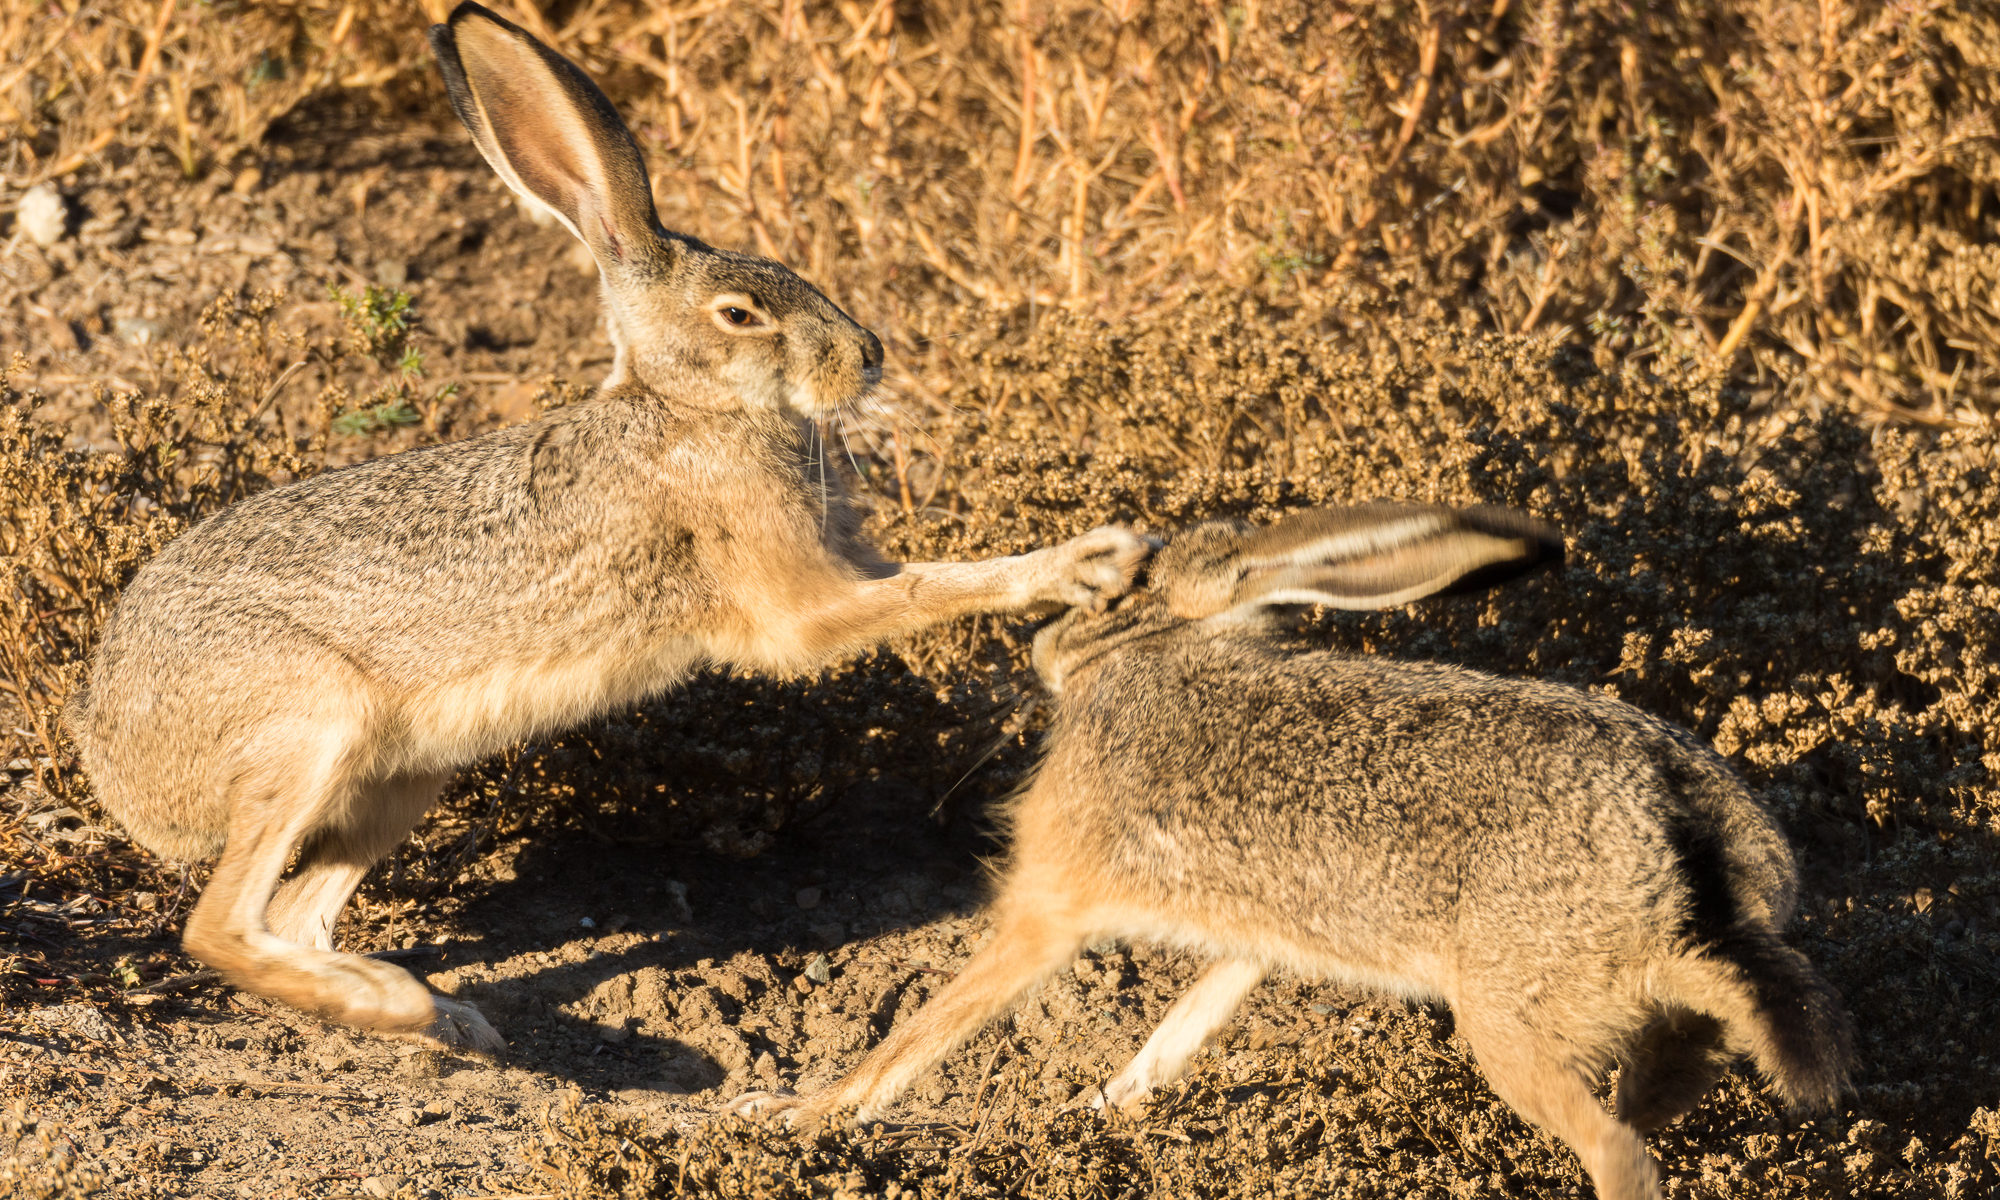 A male and female blacktail jackrabbit engage in a courtship ritual in which the male approaches the female and she wards him off with a leaping and boxing display.